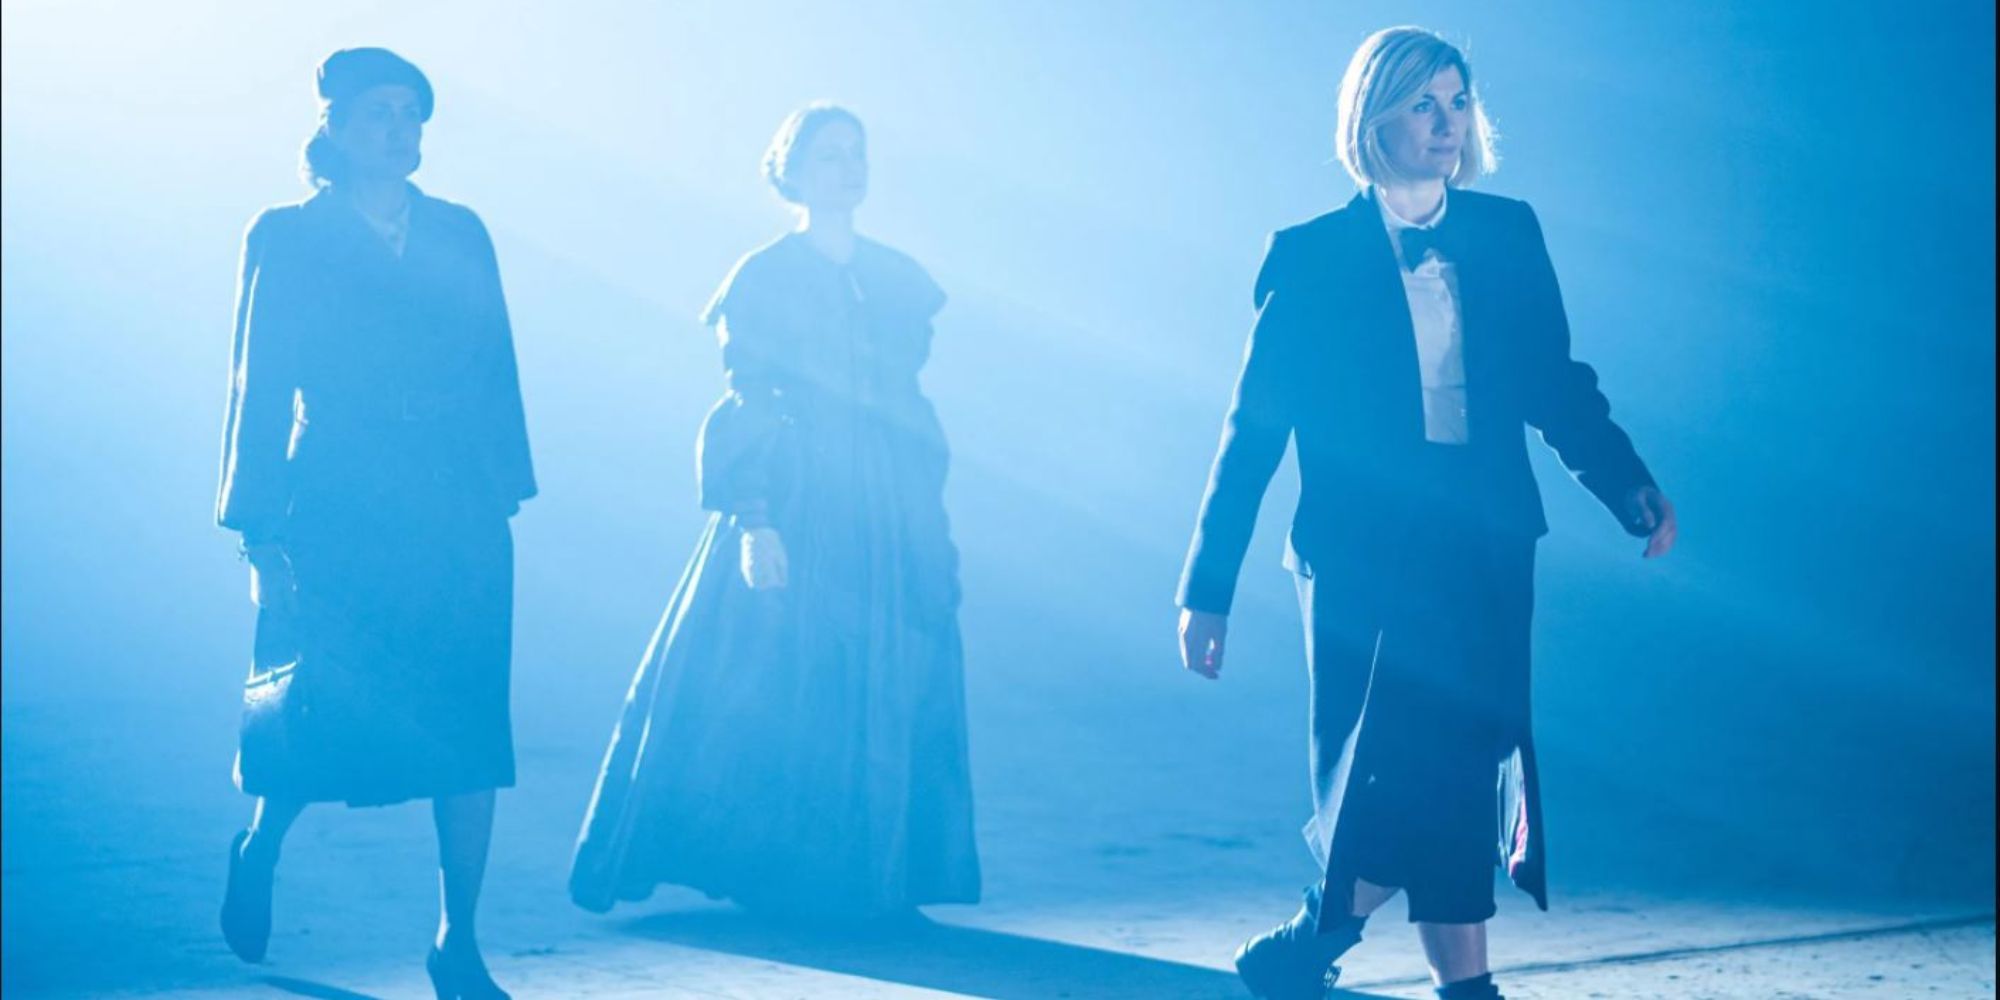 The 13th Doctor strides to the right, bathed in light, followed by Ada Lovelace and Noor Inayat Khan